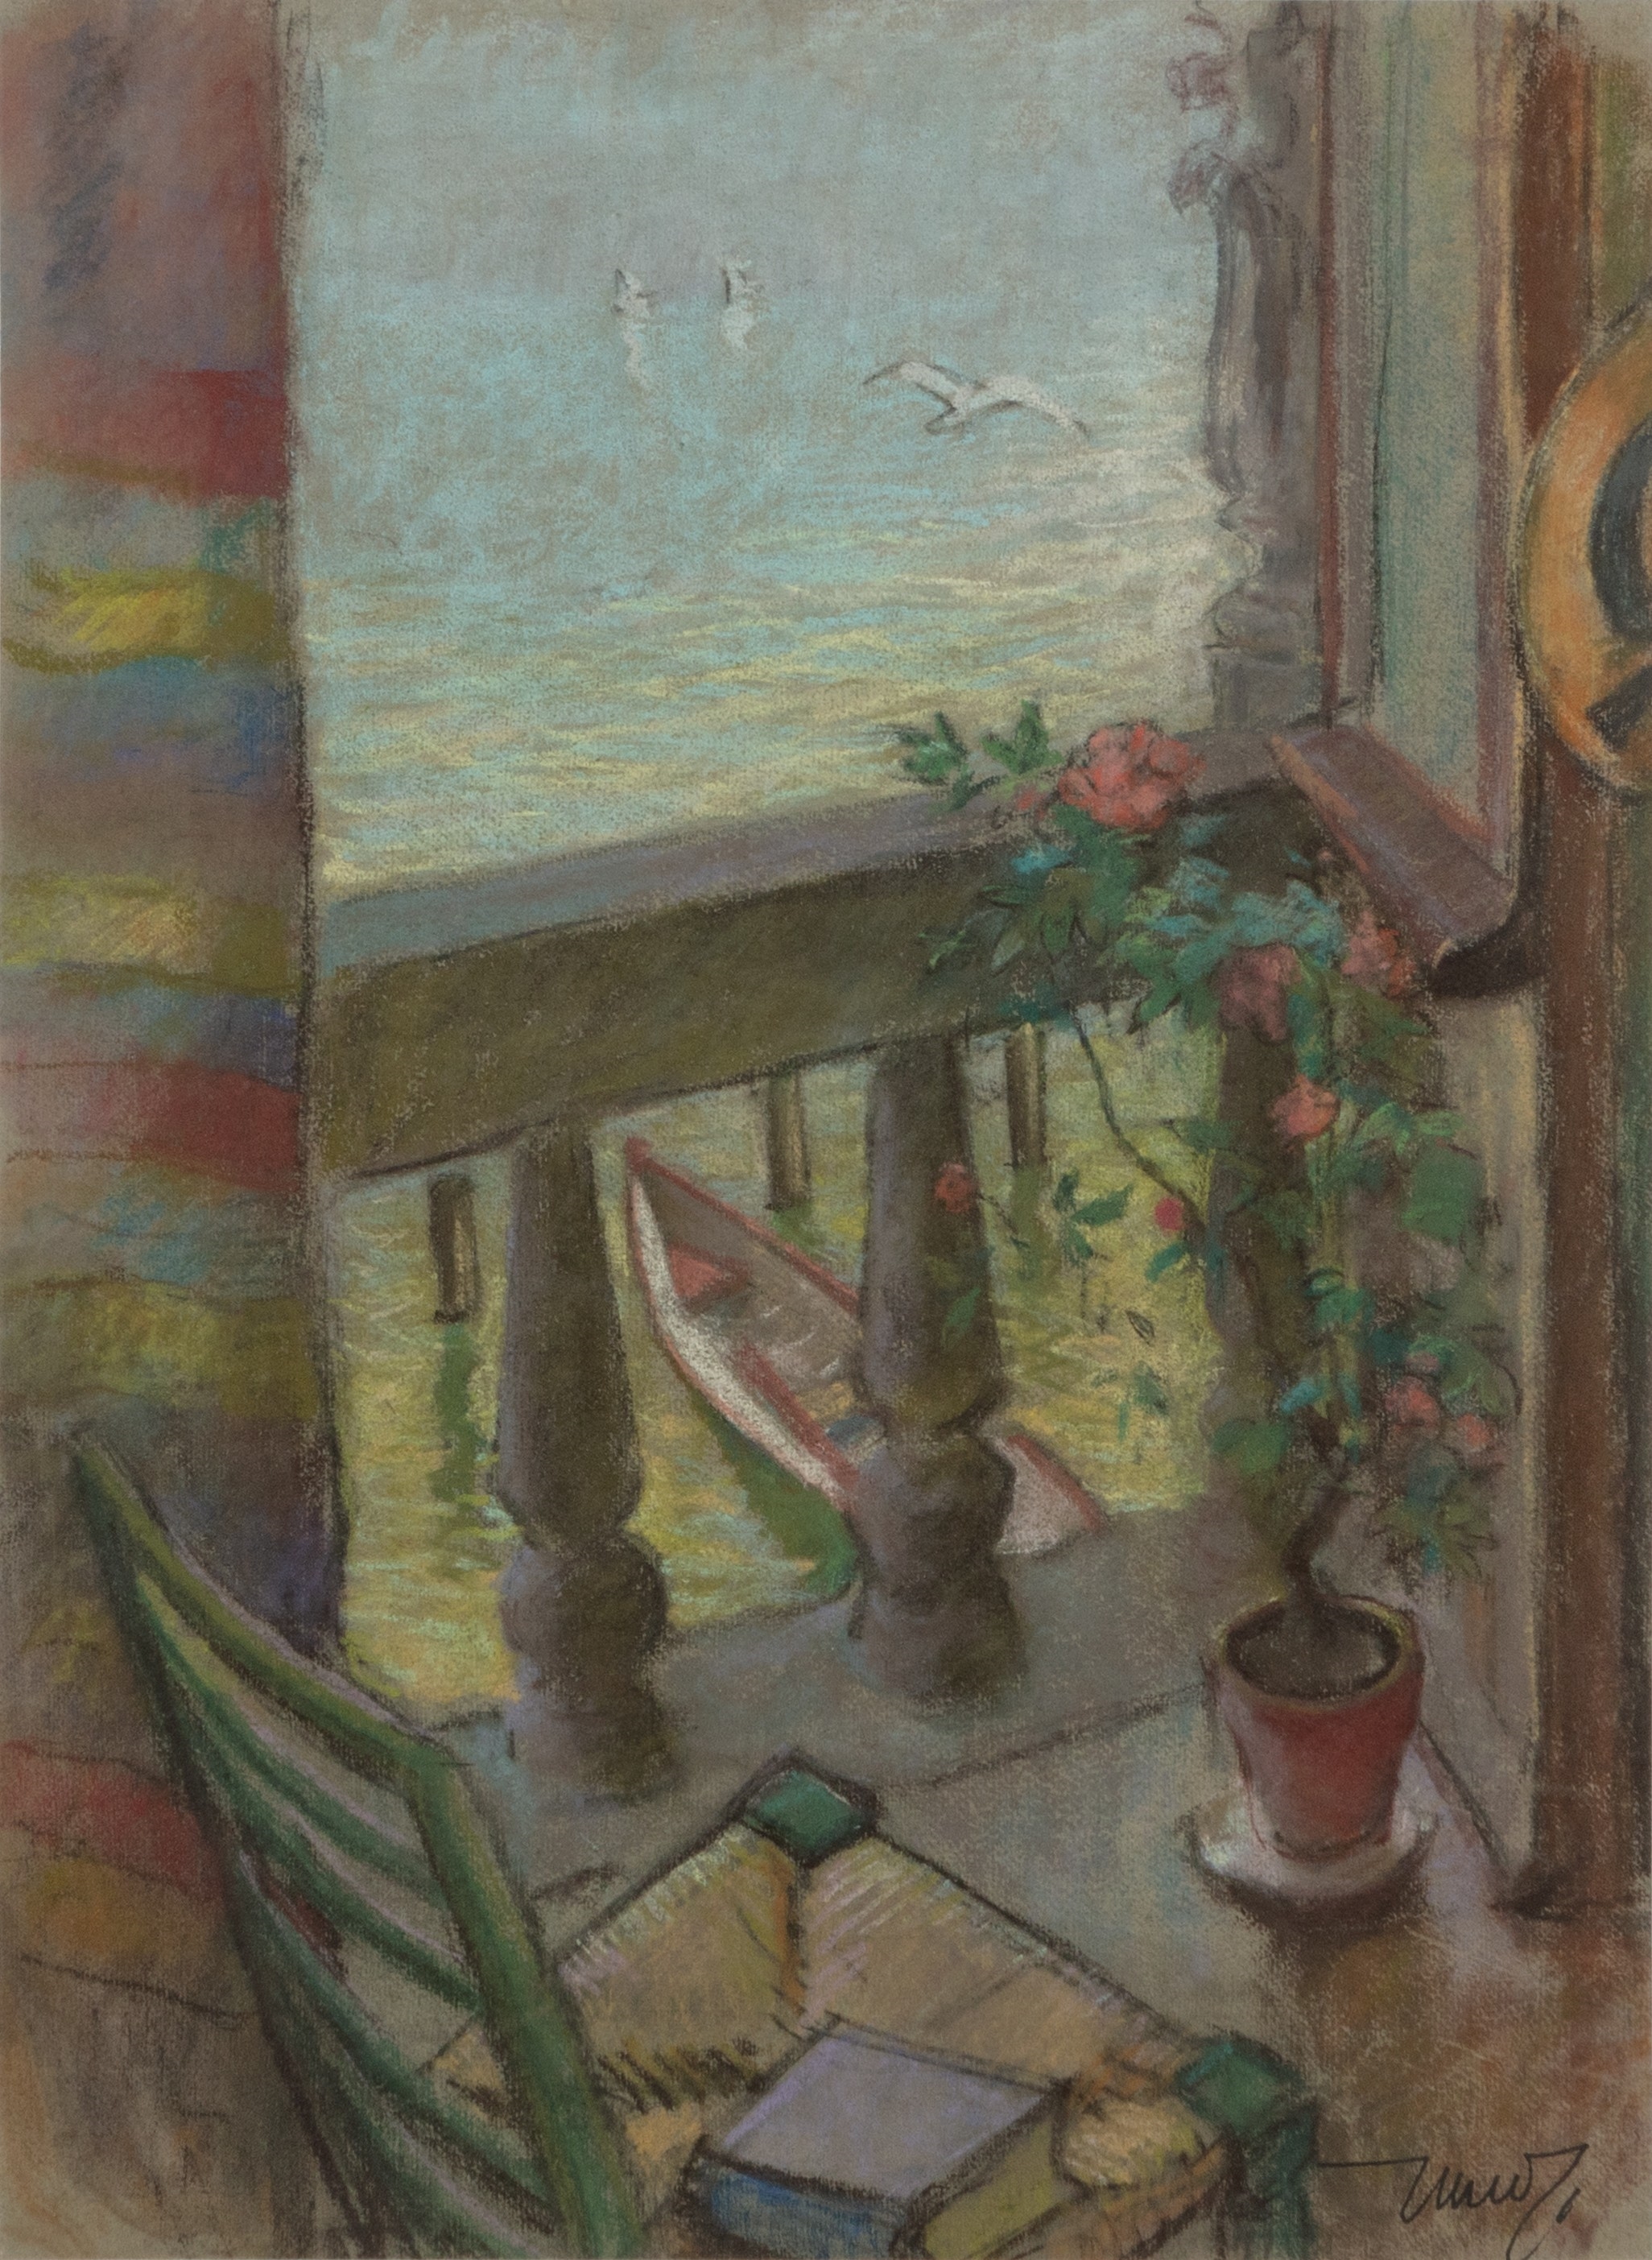 A View from Venice by Martta Wendelin